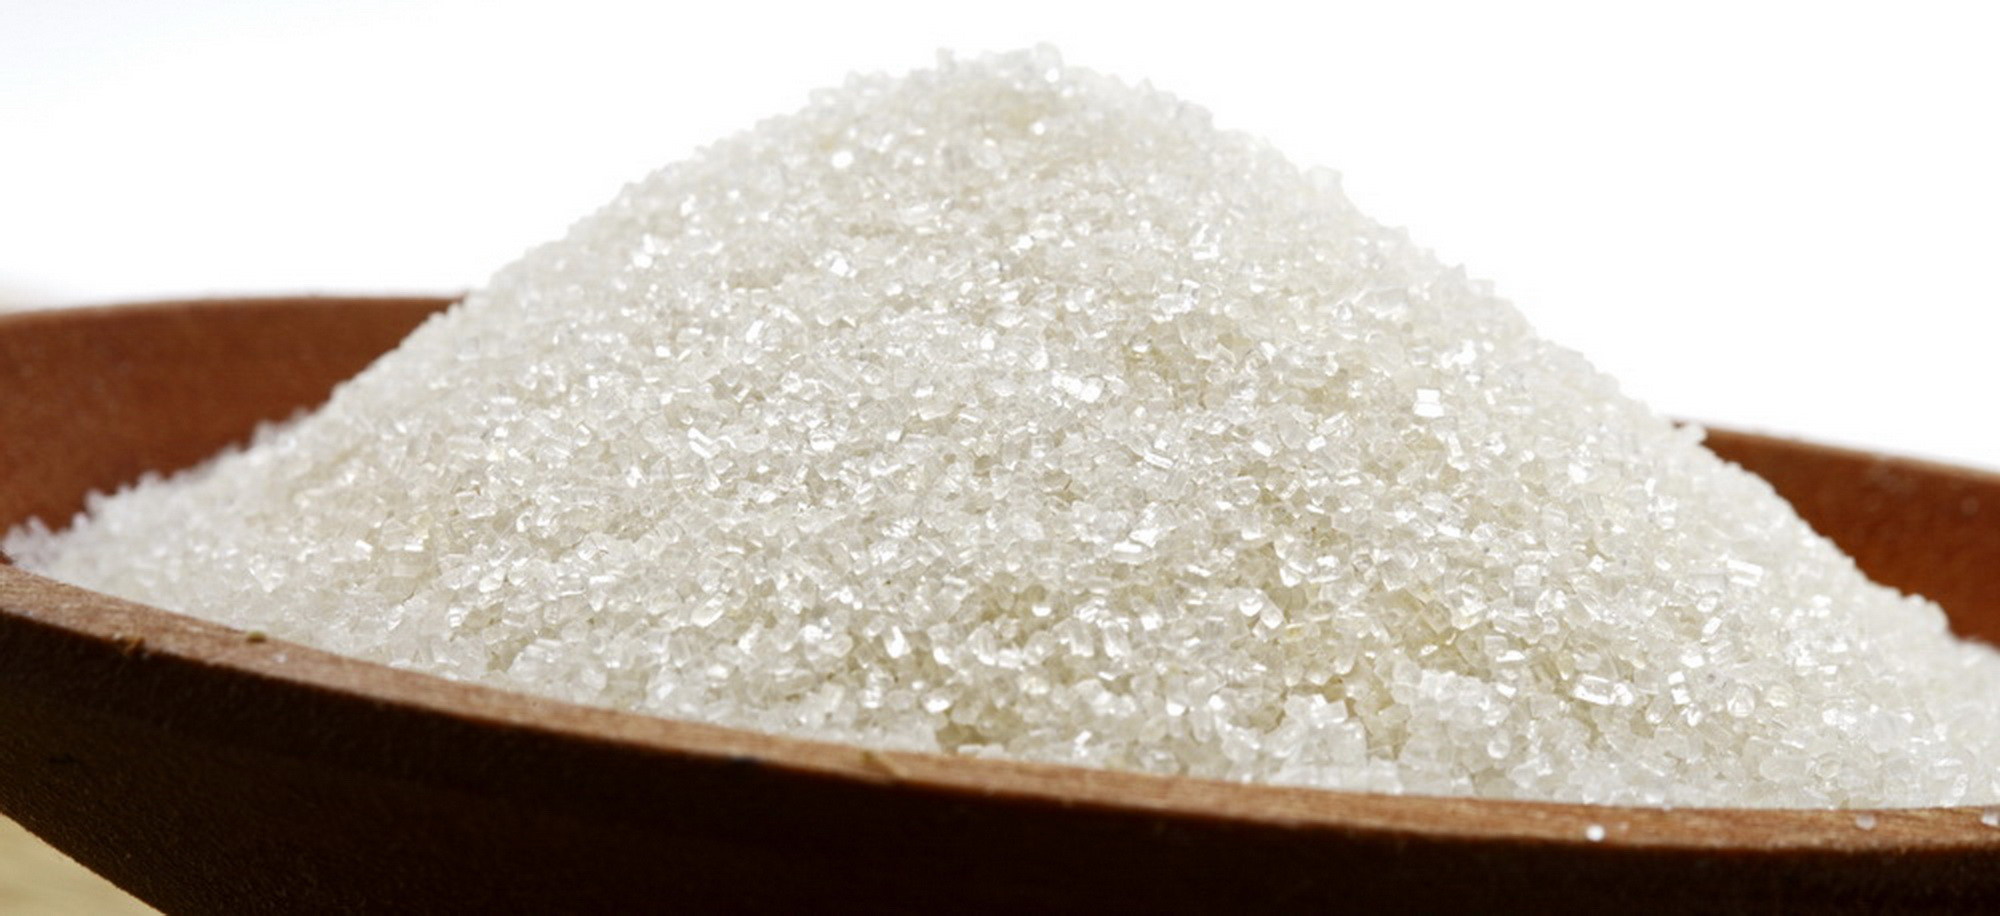 A close up of white sugar on top of a wooden table.